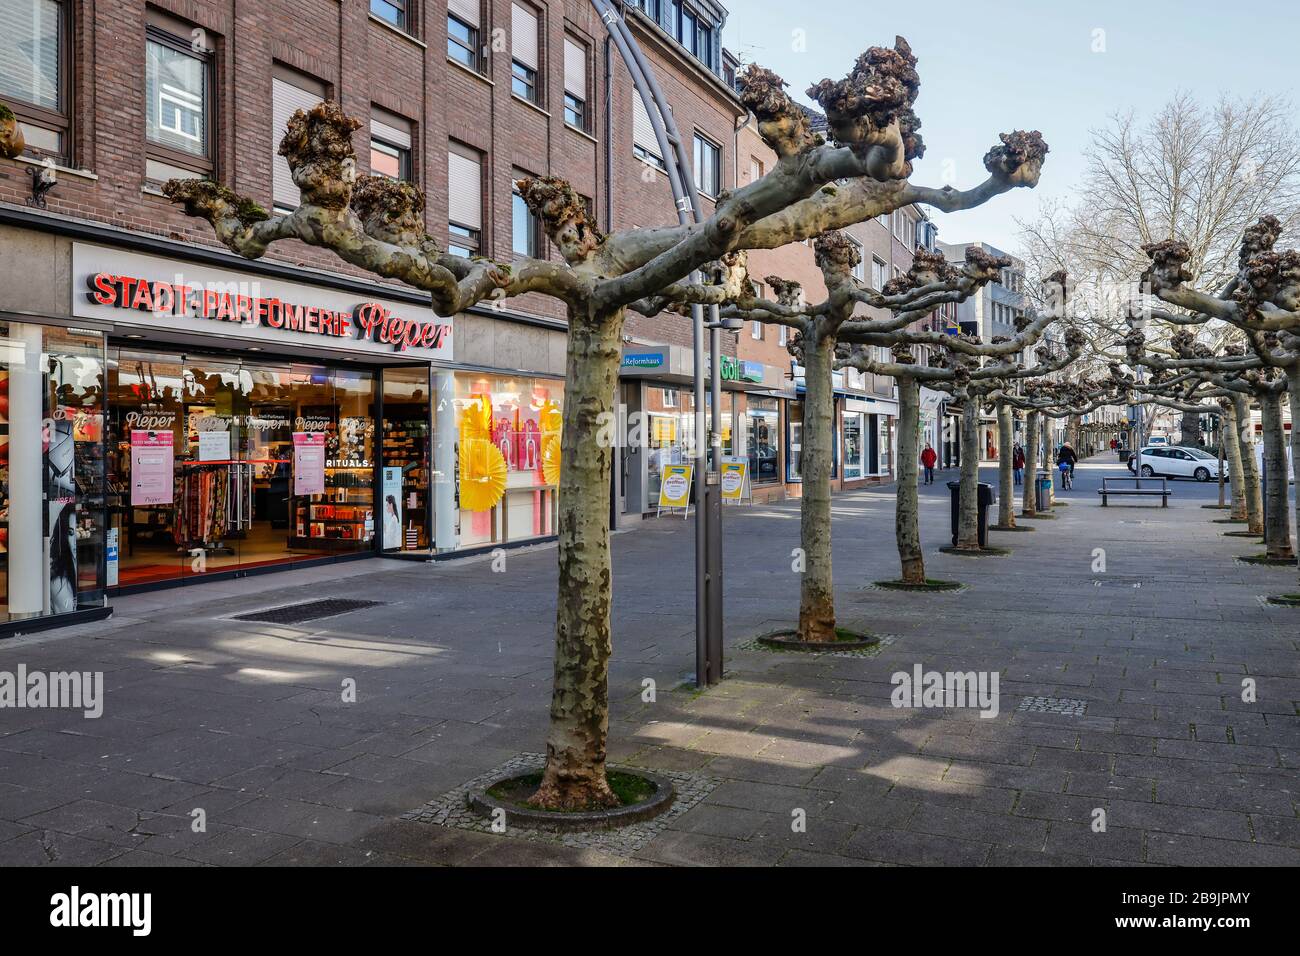 23.03.2020, Viersen, Lower Rhine, North Rhine-Westphalia, Germany - contact ban due to corona pandemic, on Monday deserted shopping street with closed Stock Photo